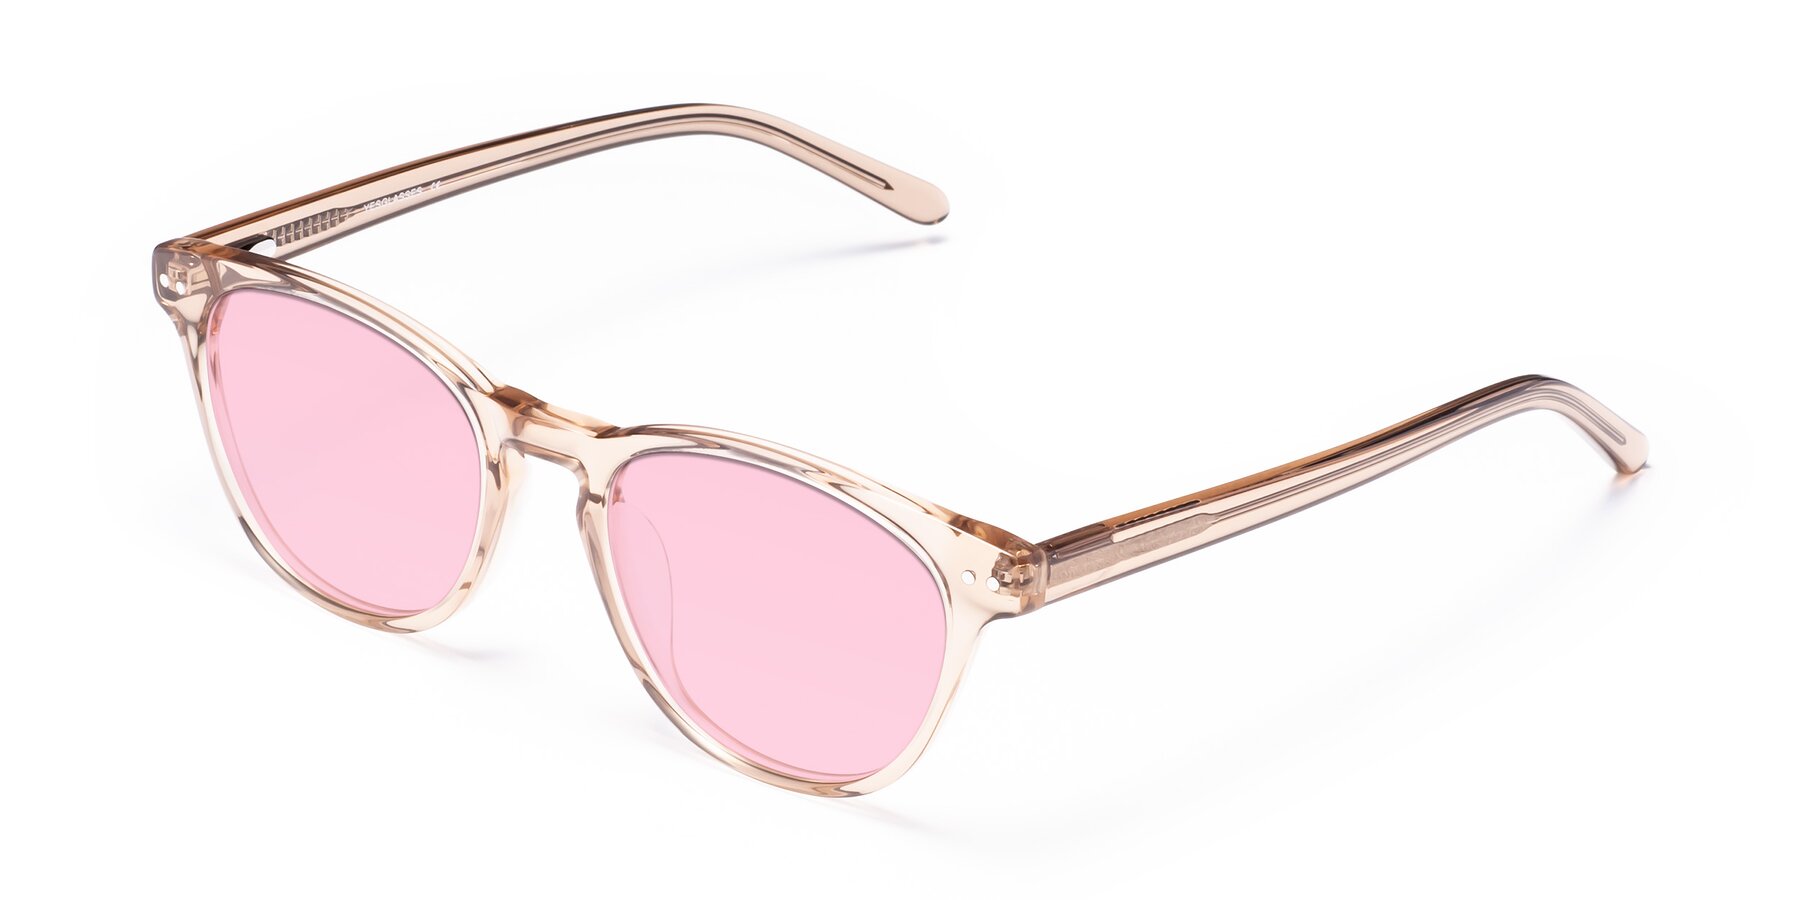 Angle of Blaze in light Brown with Light Pink Tinted Lenses